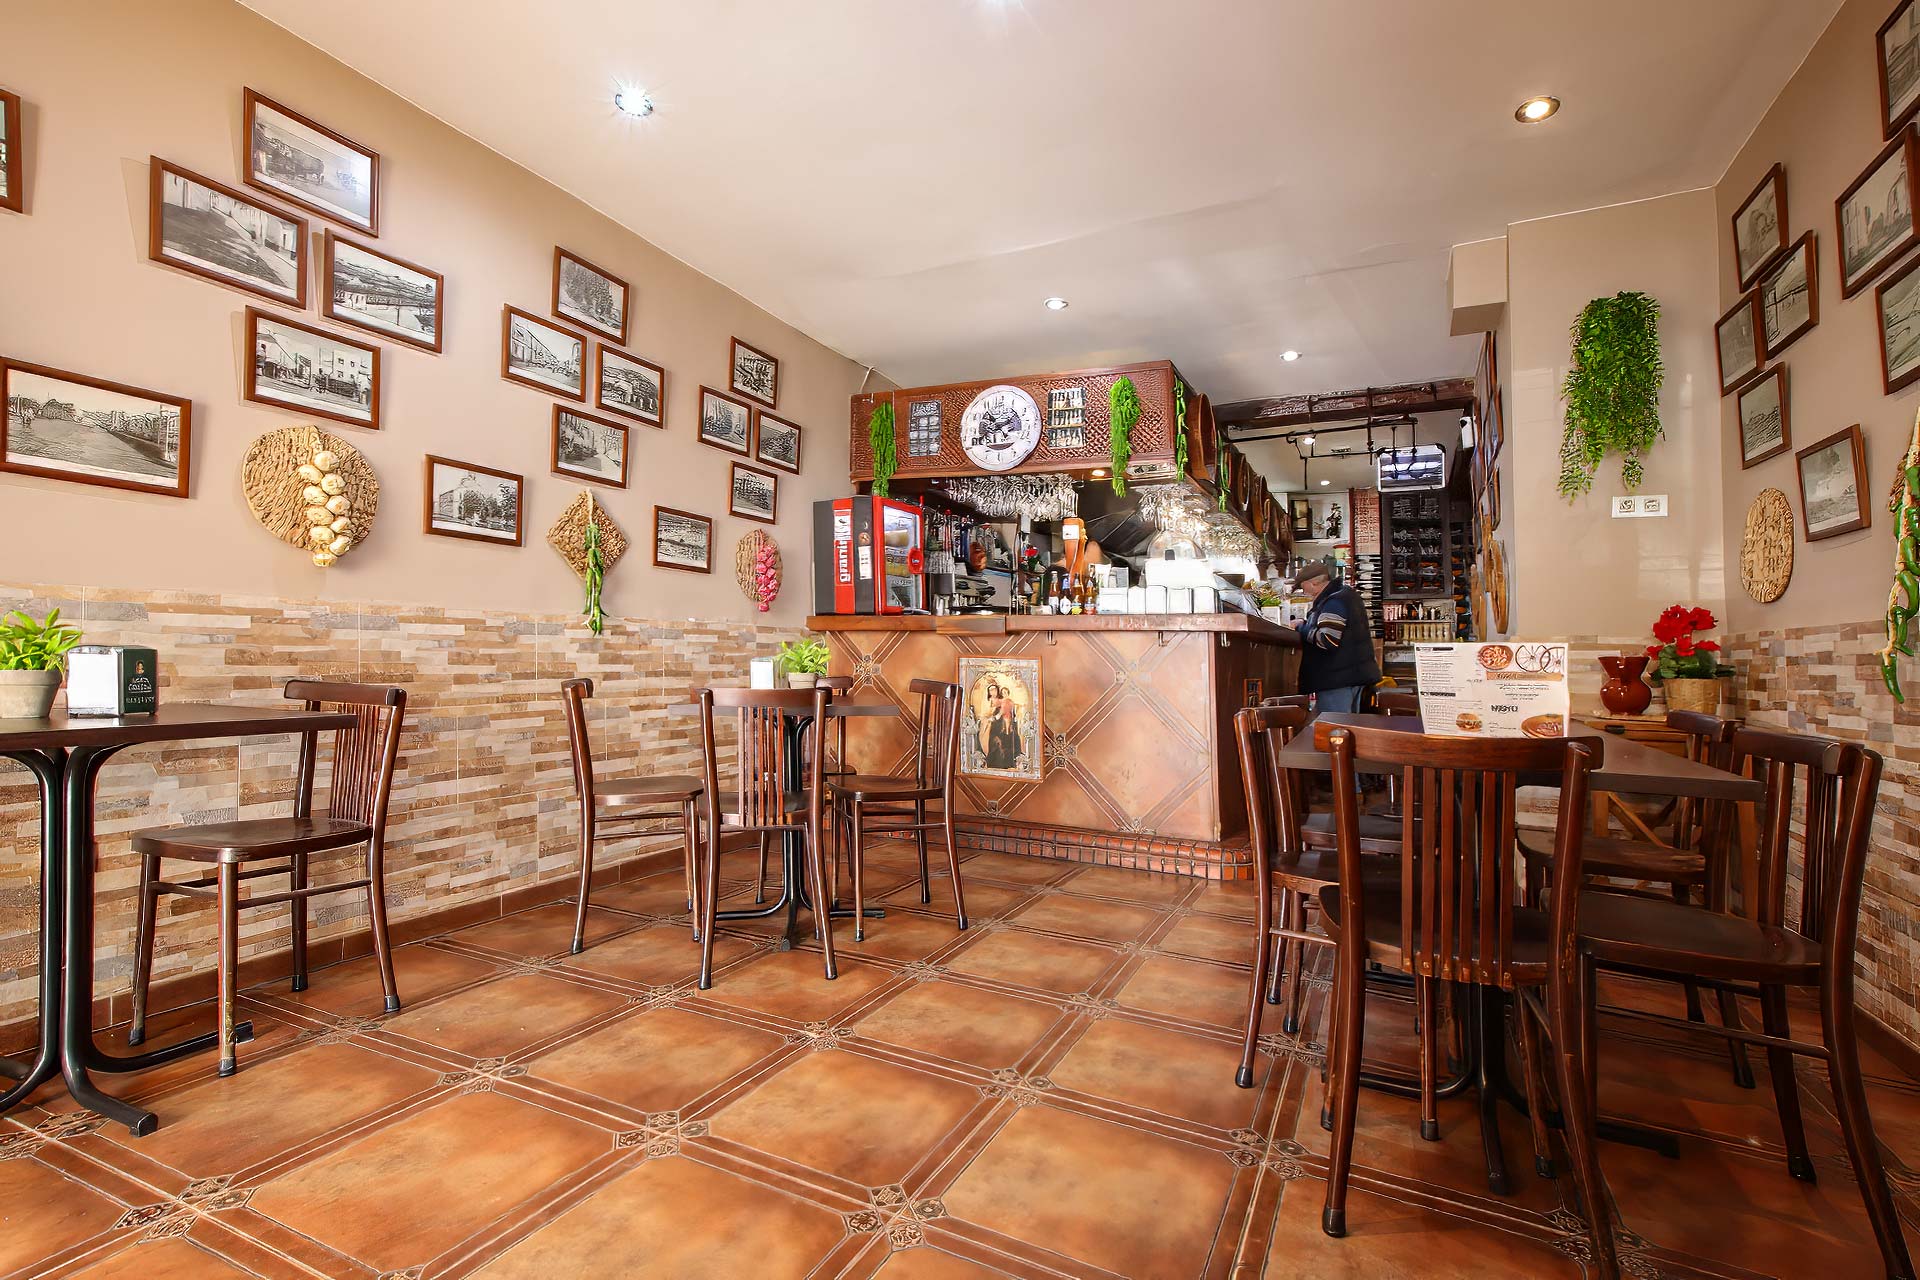 The interior of the restaurant exudes a spanish tapas bar atmosphere.